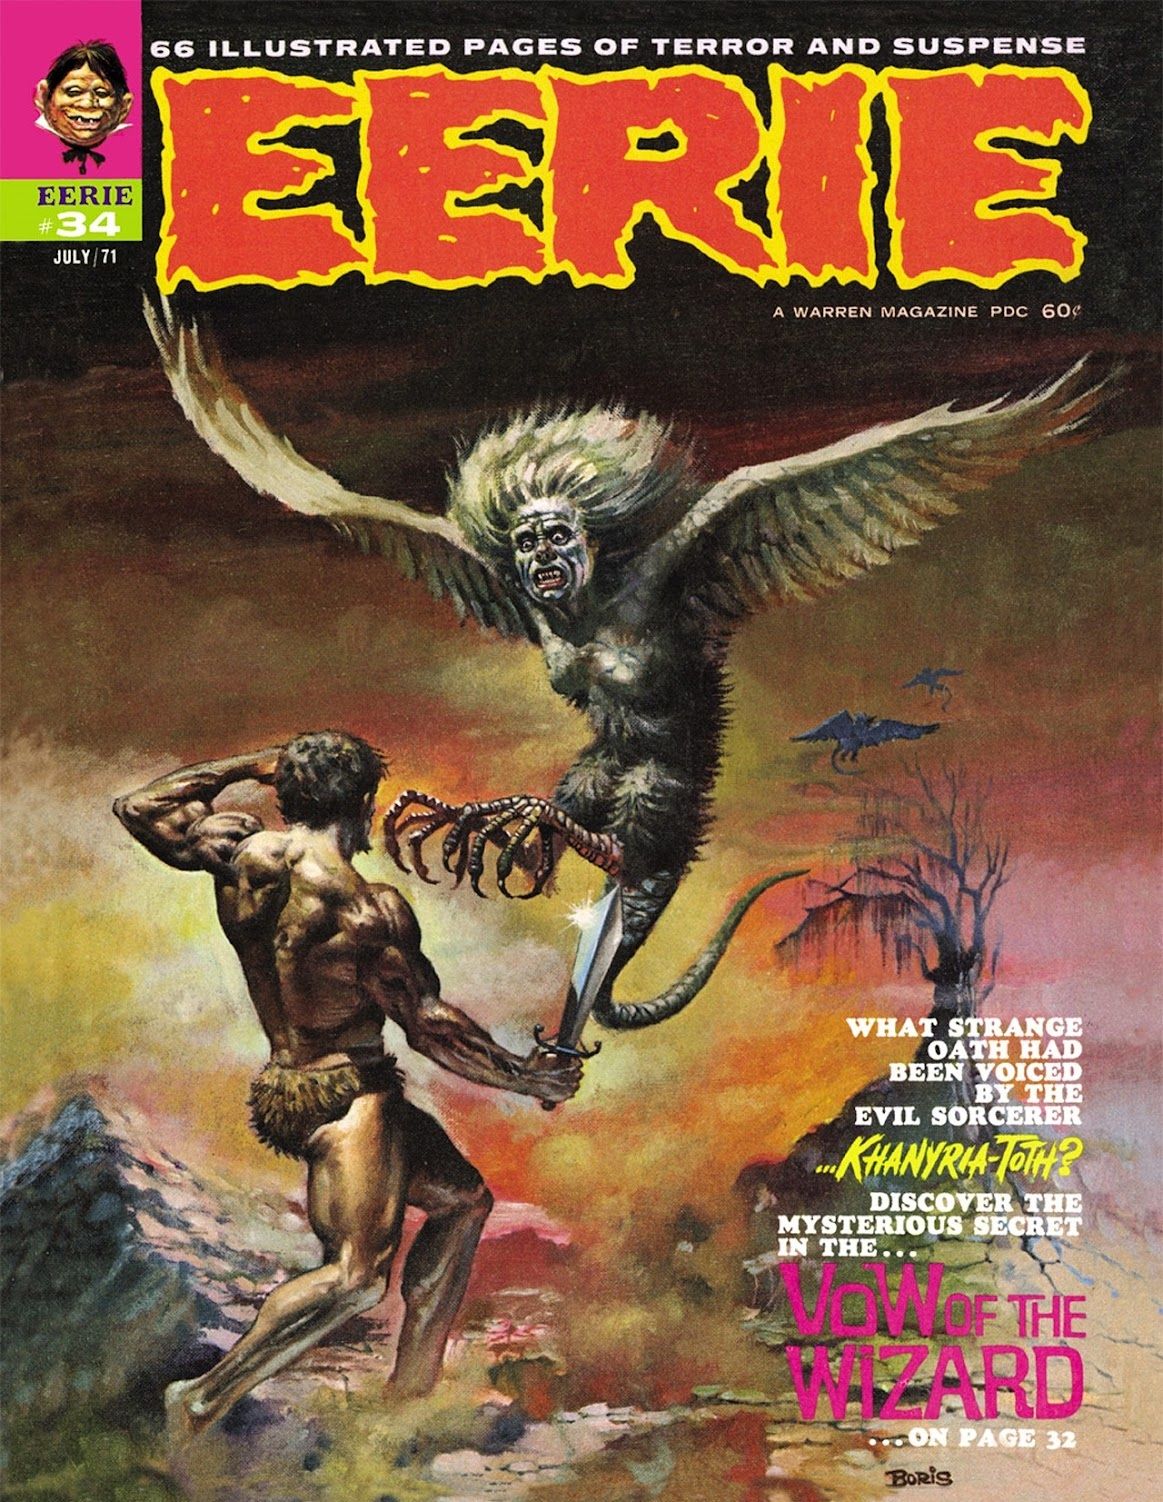 The cover of Eerie #34